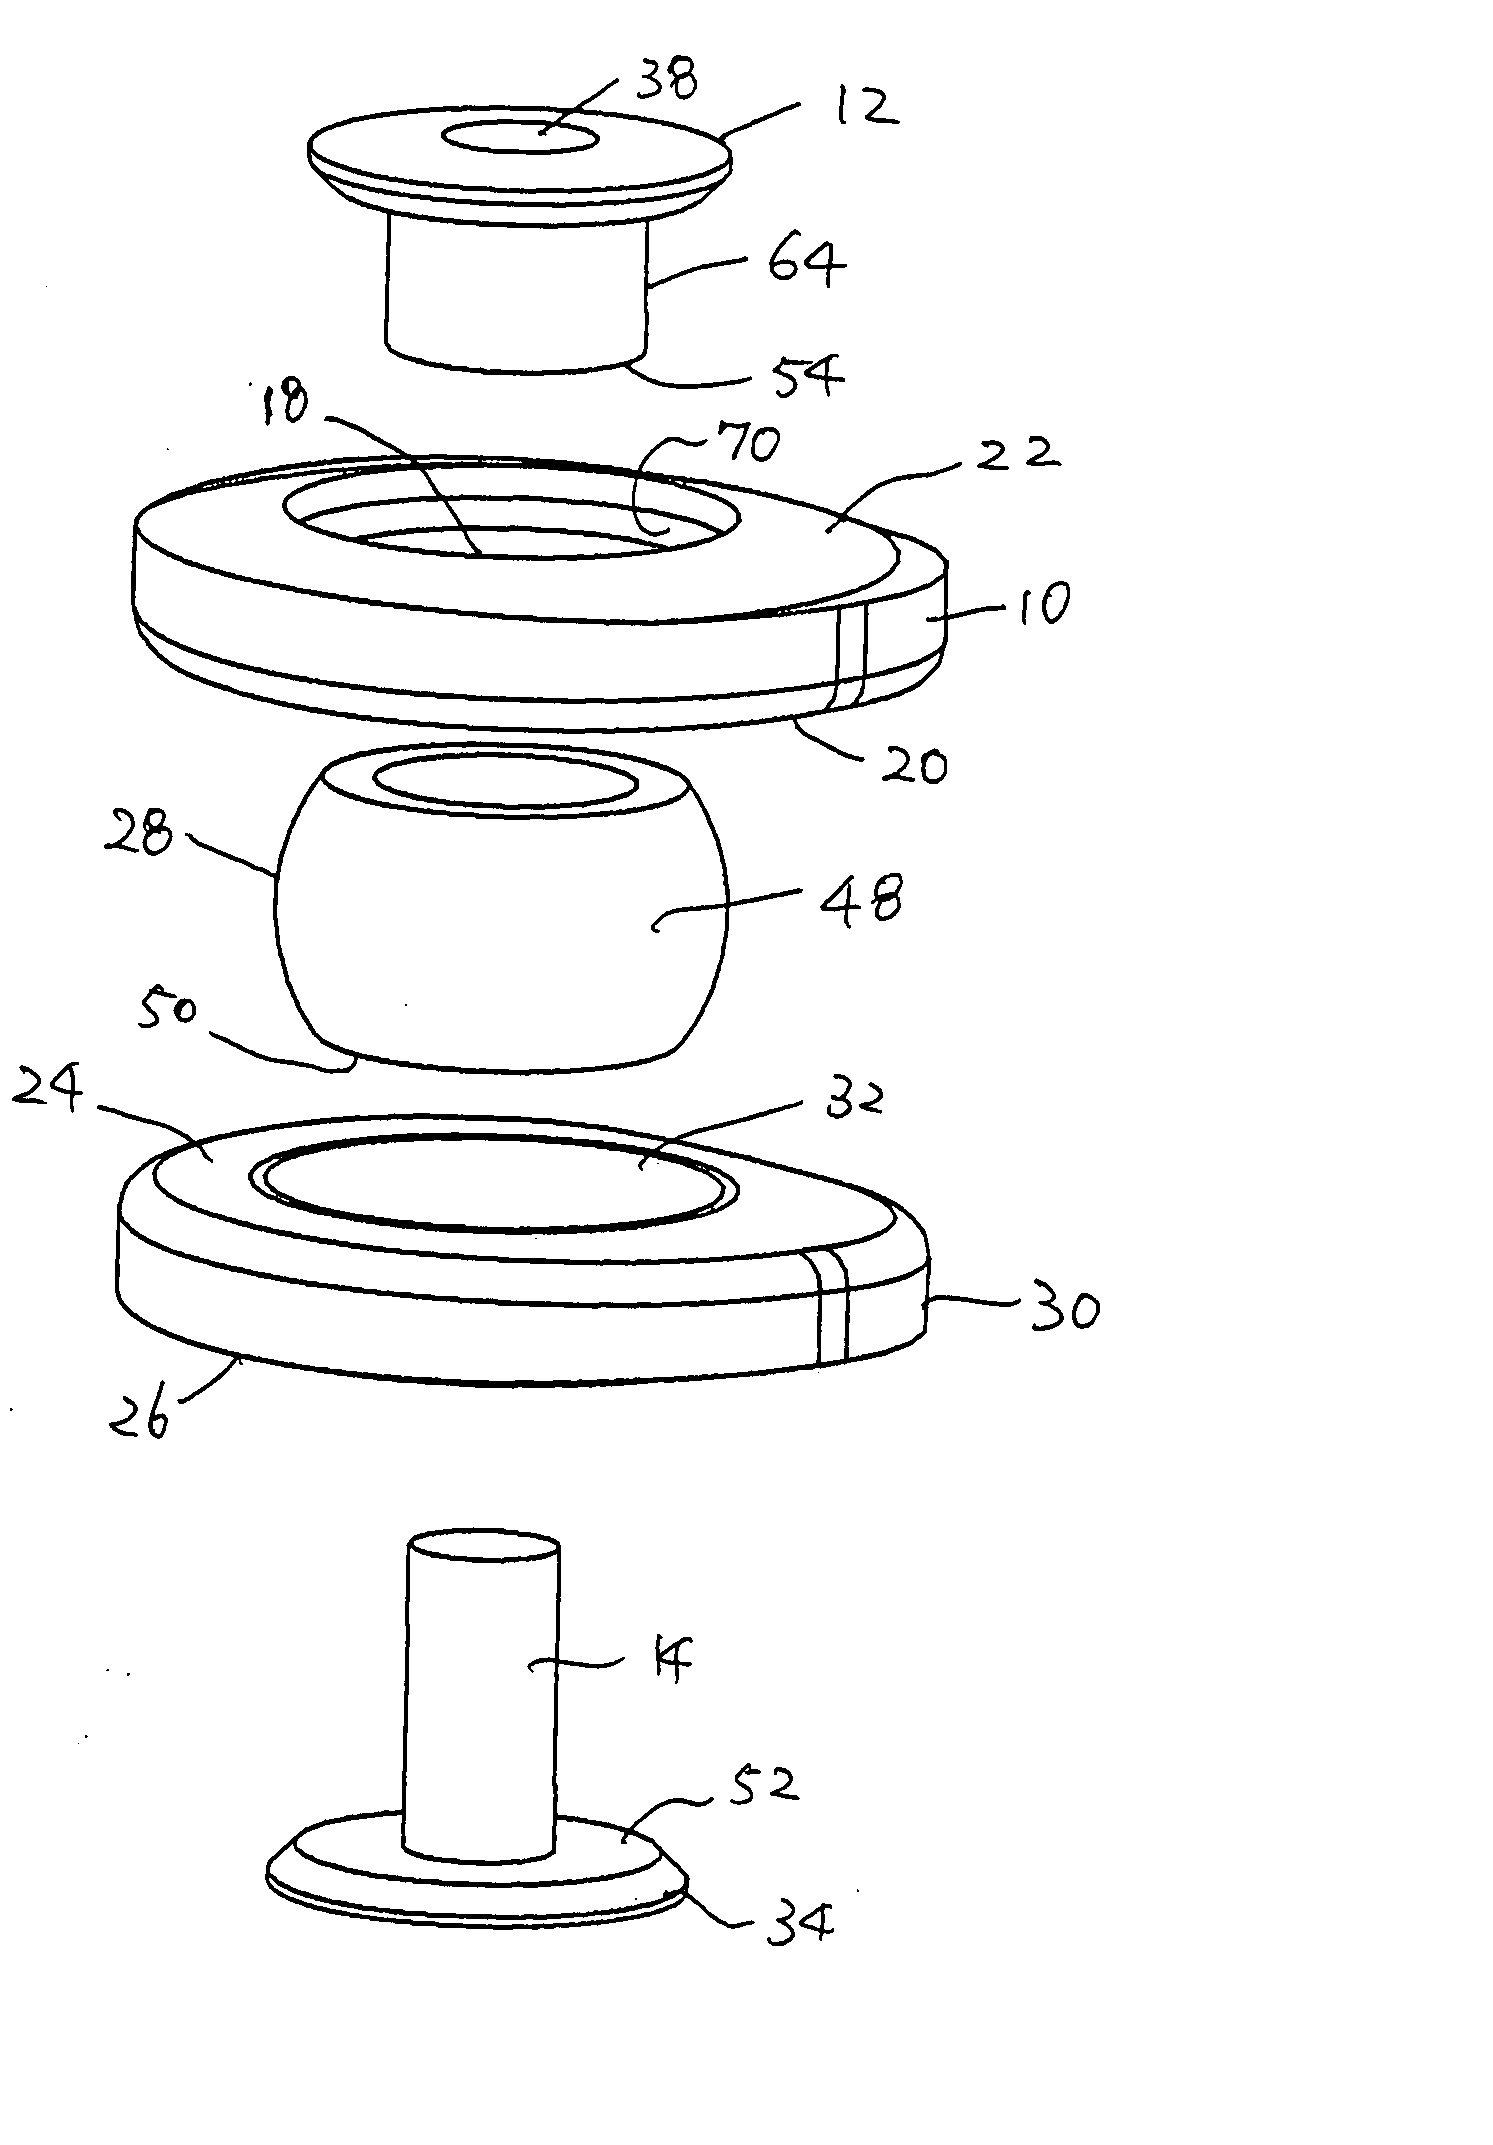 Artificial intervertebral disc having a bored semispherical bearing with a compression locking post and retaining caps